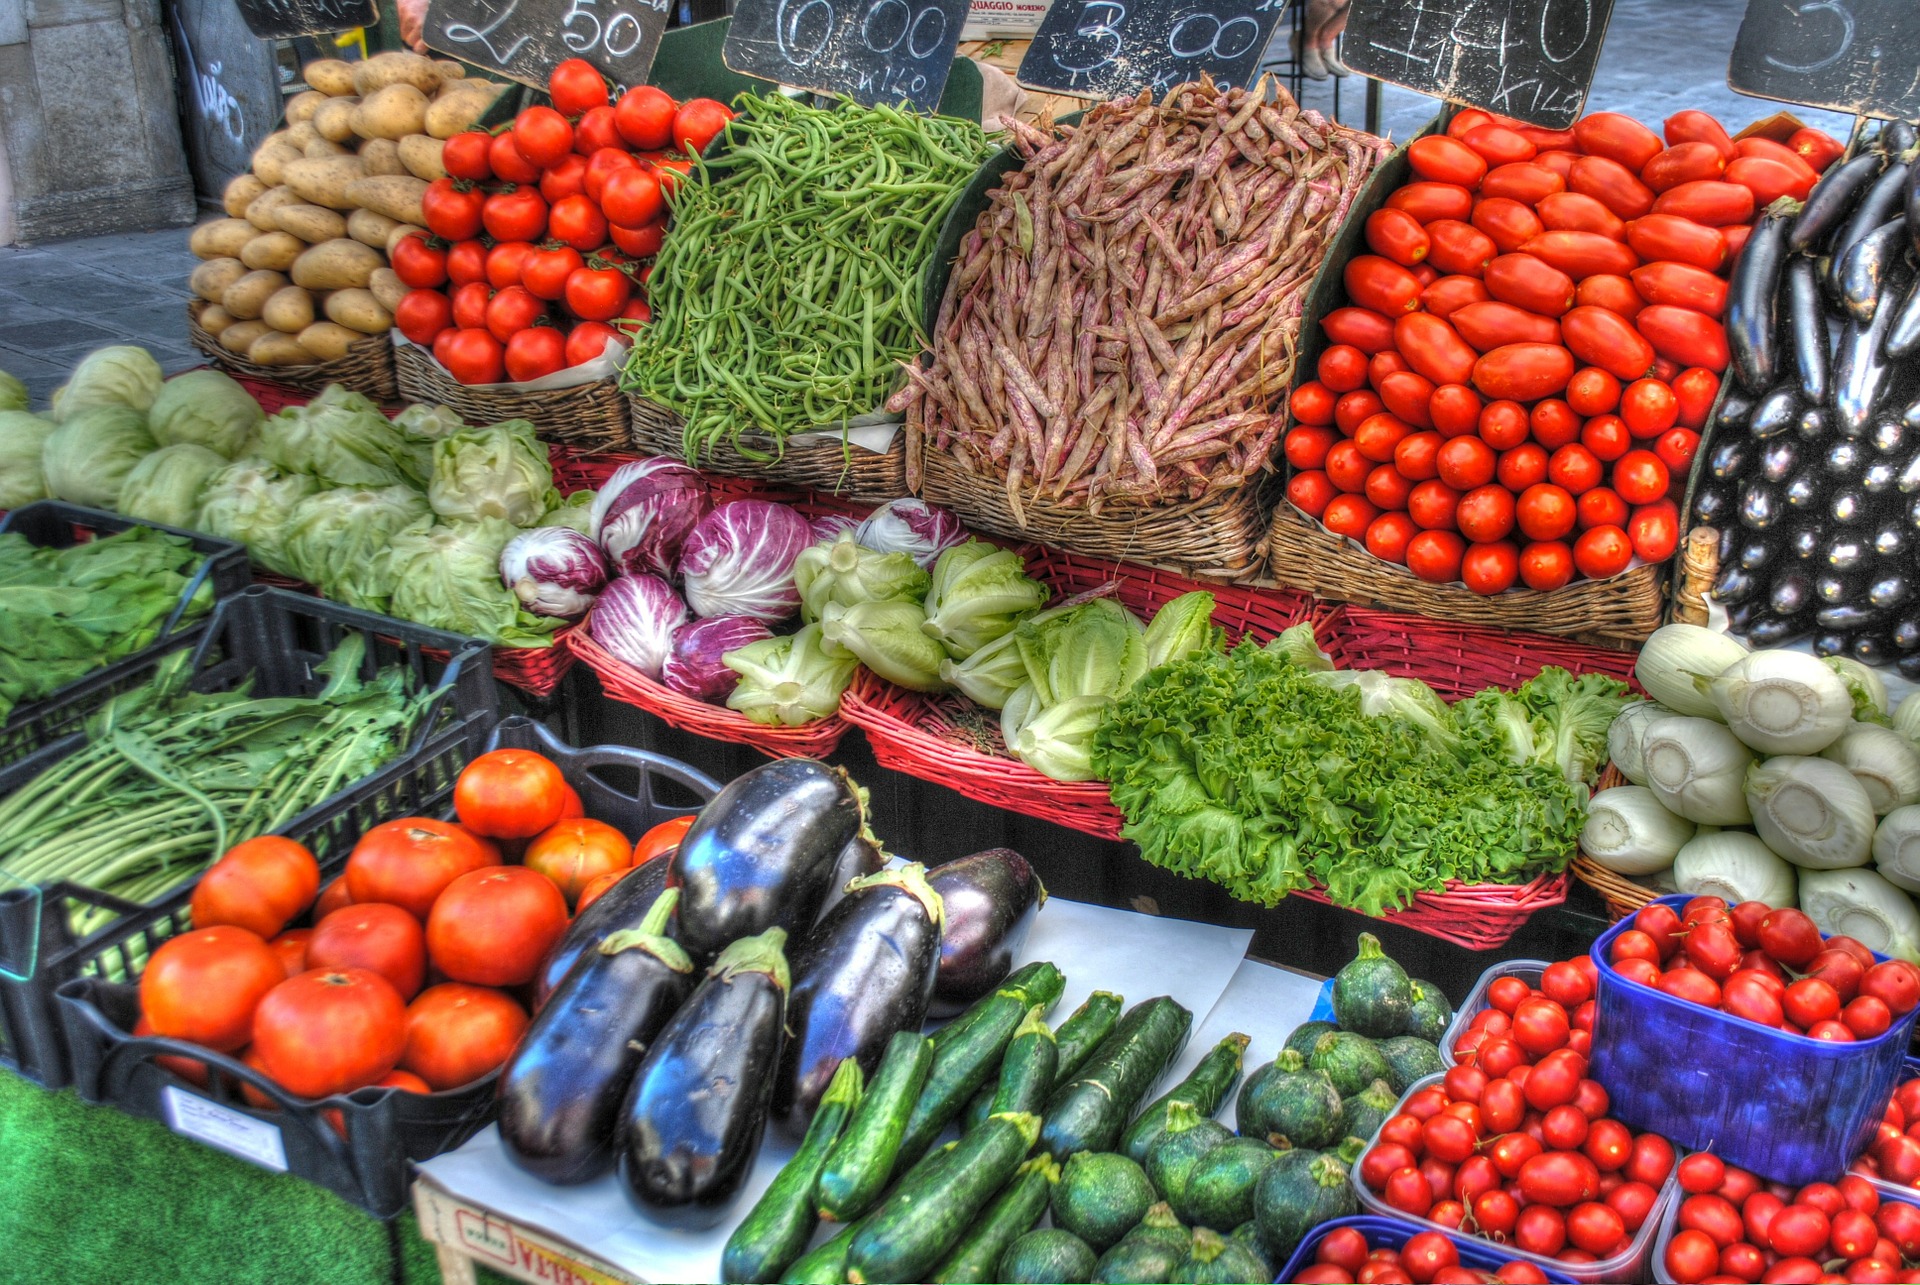 RUNAWAY INFLATION: Now it’s vegetables that are skyrocketing in price